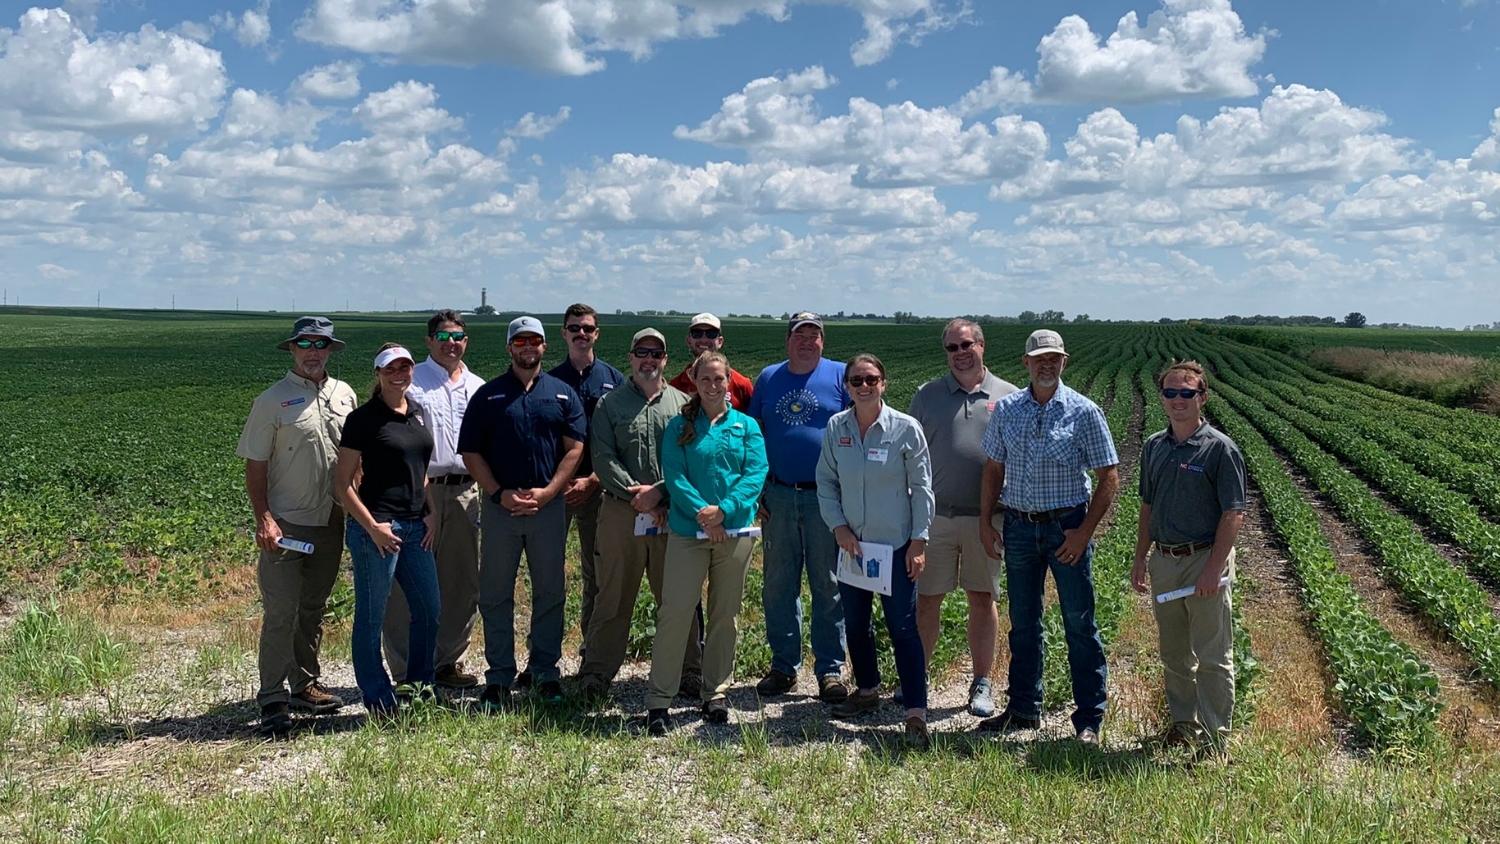 Rachel Vann poses with a NC Extension group on a field visit